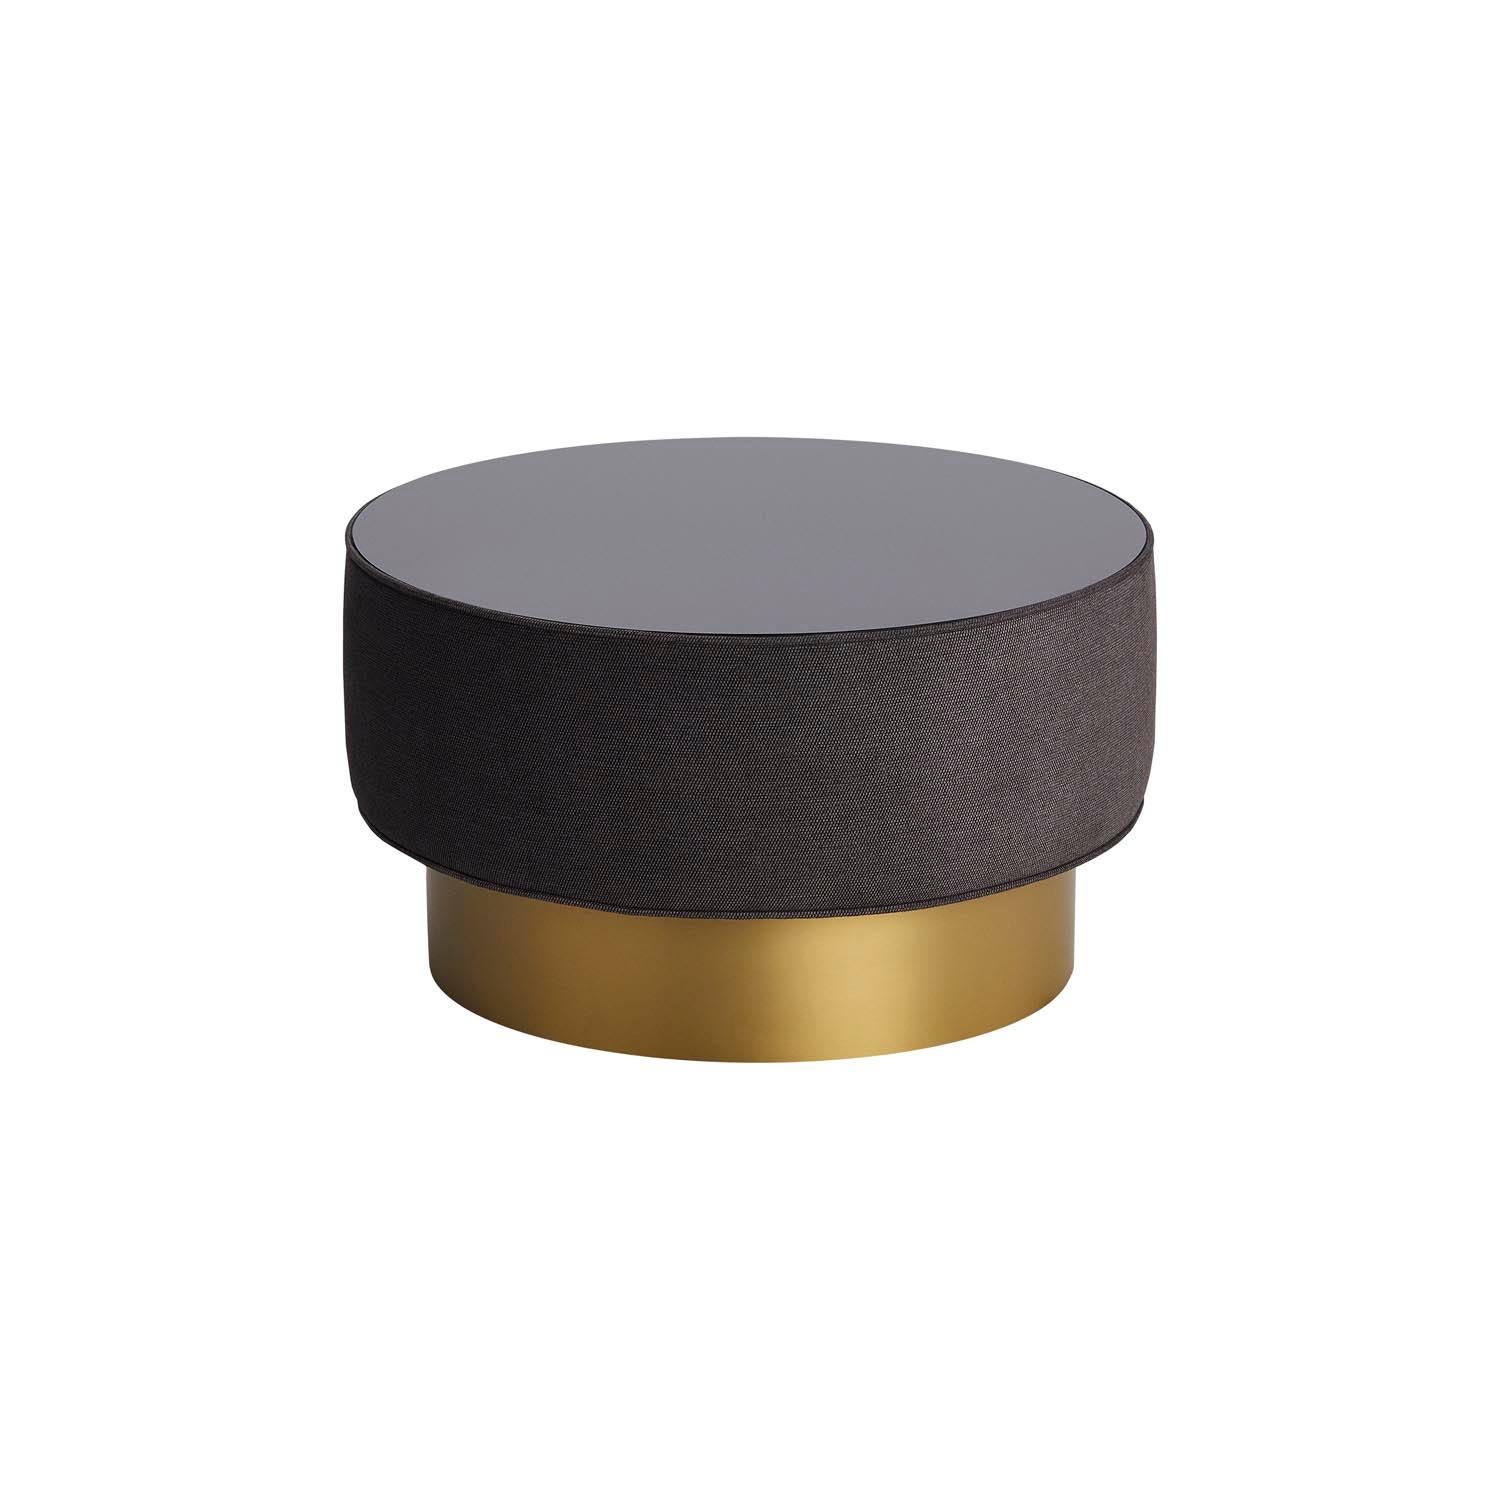 Palma II is a round coffee table with a modern and refined style, covered entirely in fabric, with a colored glass top that gives it a contemporary look.‎ Palma is available with Antique Brass lacquer base.

Shown with structure covered in Tiffany